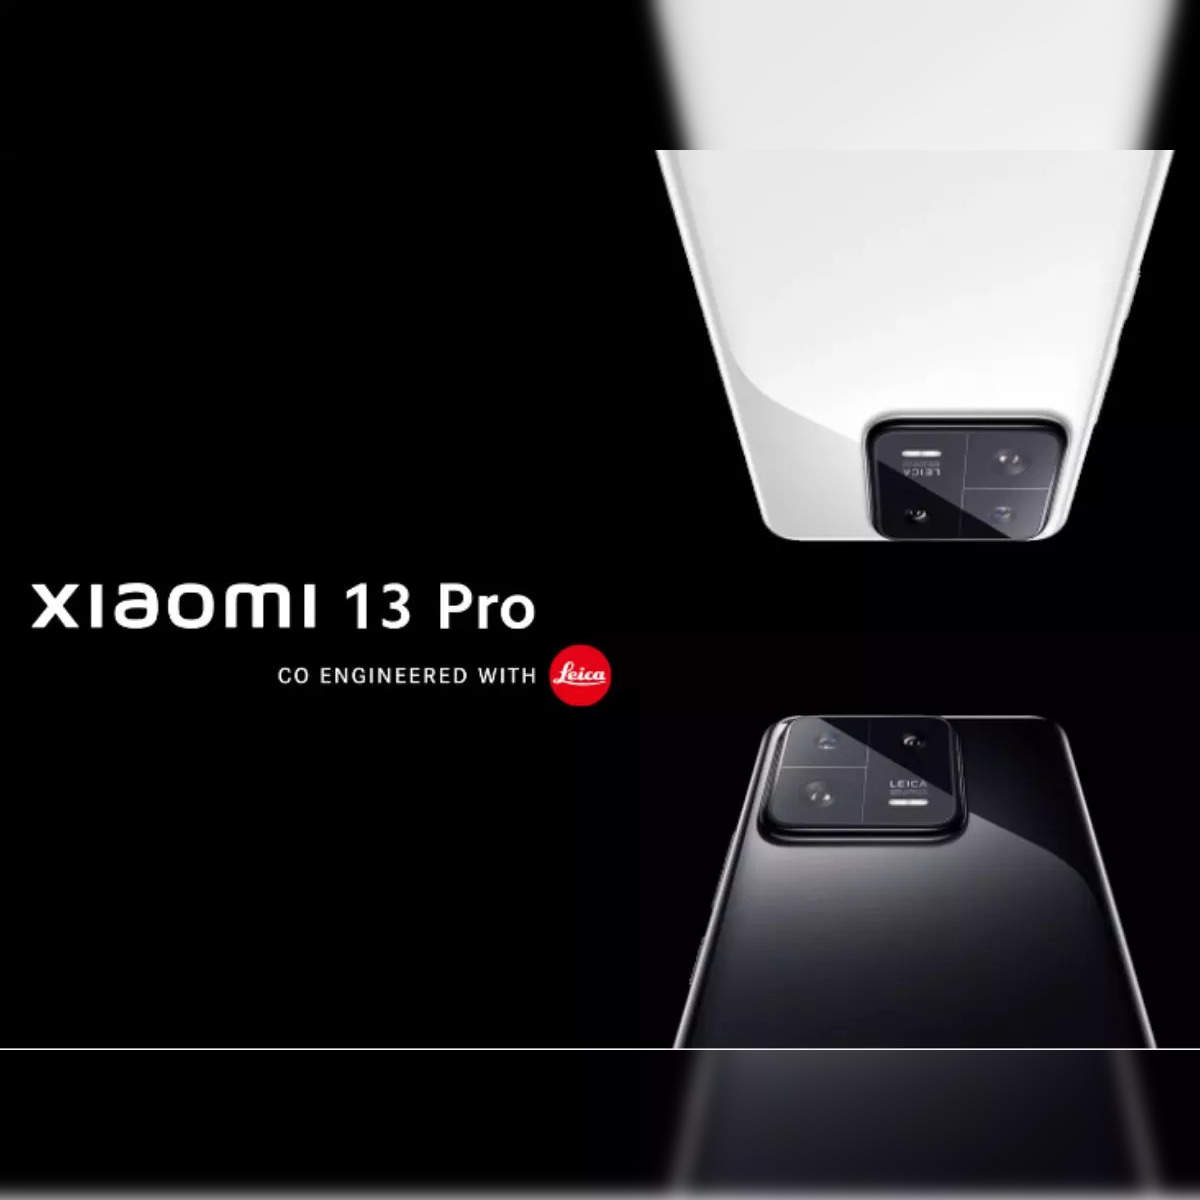 Xiaomi 13 and 13 Pro announced with SD 8 Gen 2, new Leica cameras